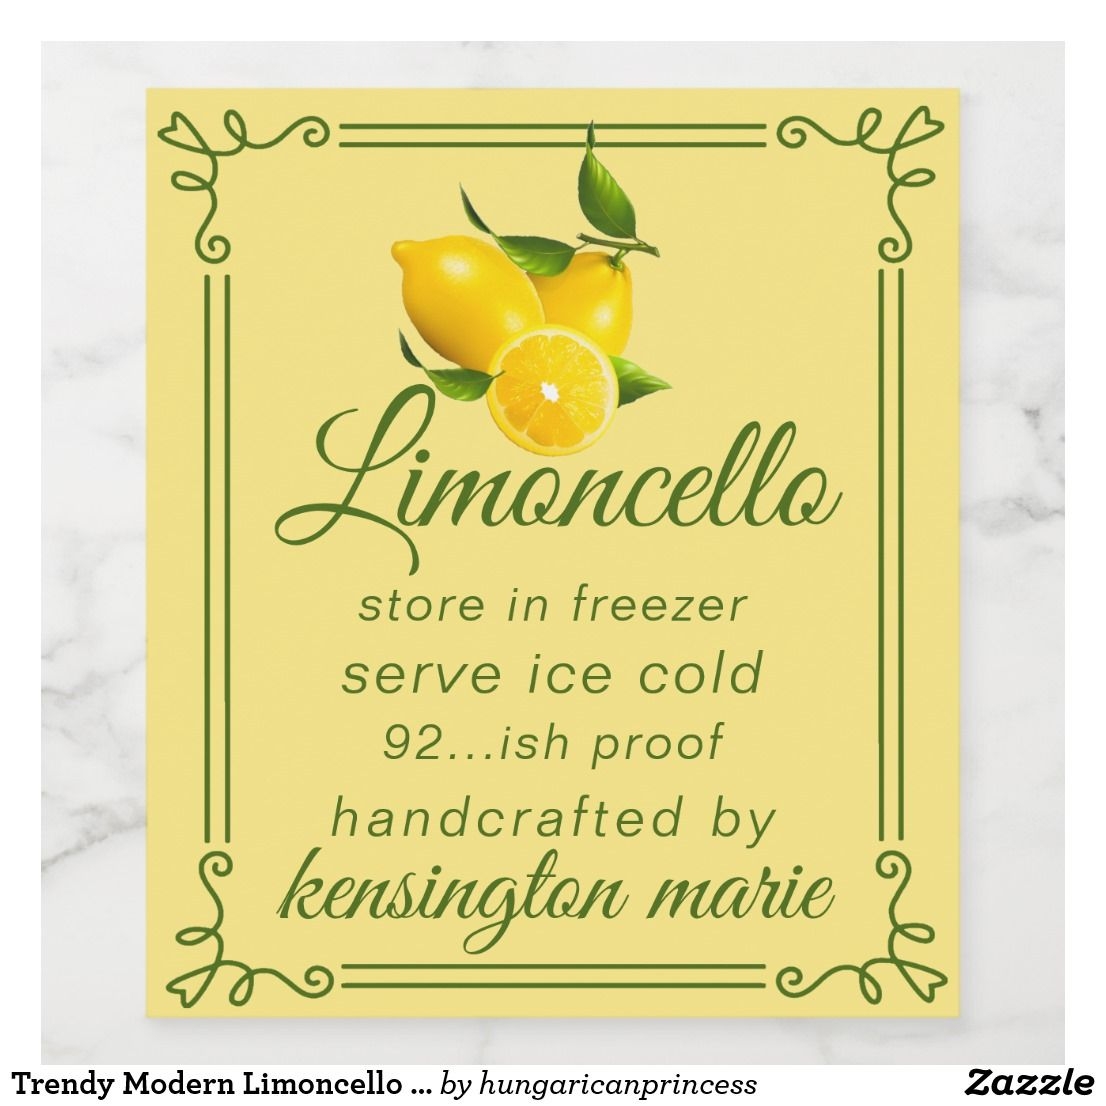 Trendy Modern Limoncello Label For A Tall Bottle Zazzle Limoncello Labels Limoncello Bottle Gift